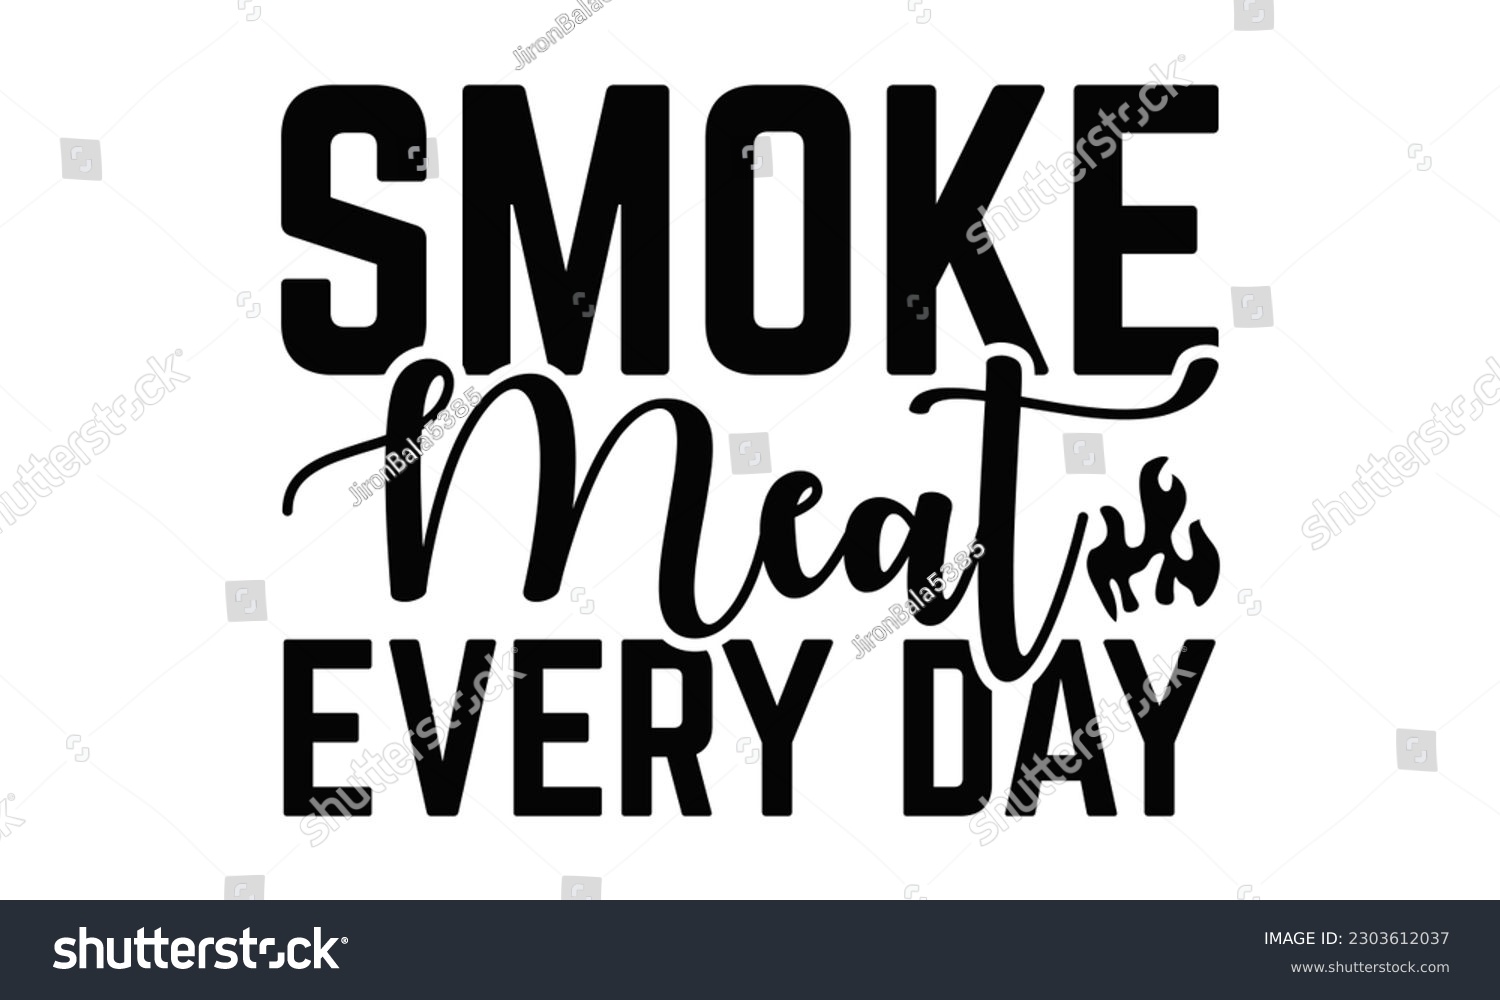 SVG of  Smoke Meat Every Da - Barbecue SVG Design, Isolated on white background, Illustration for prints on t-shirts, bags, posters, cards and Mug.
 svg